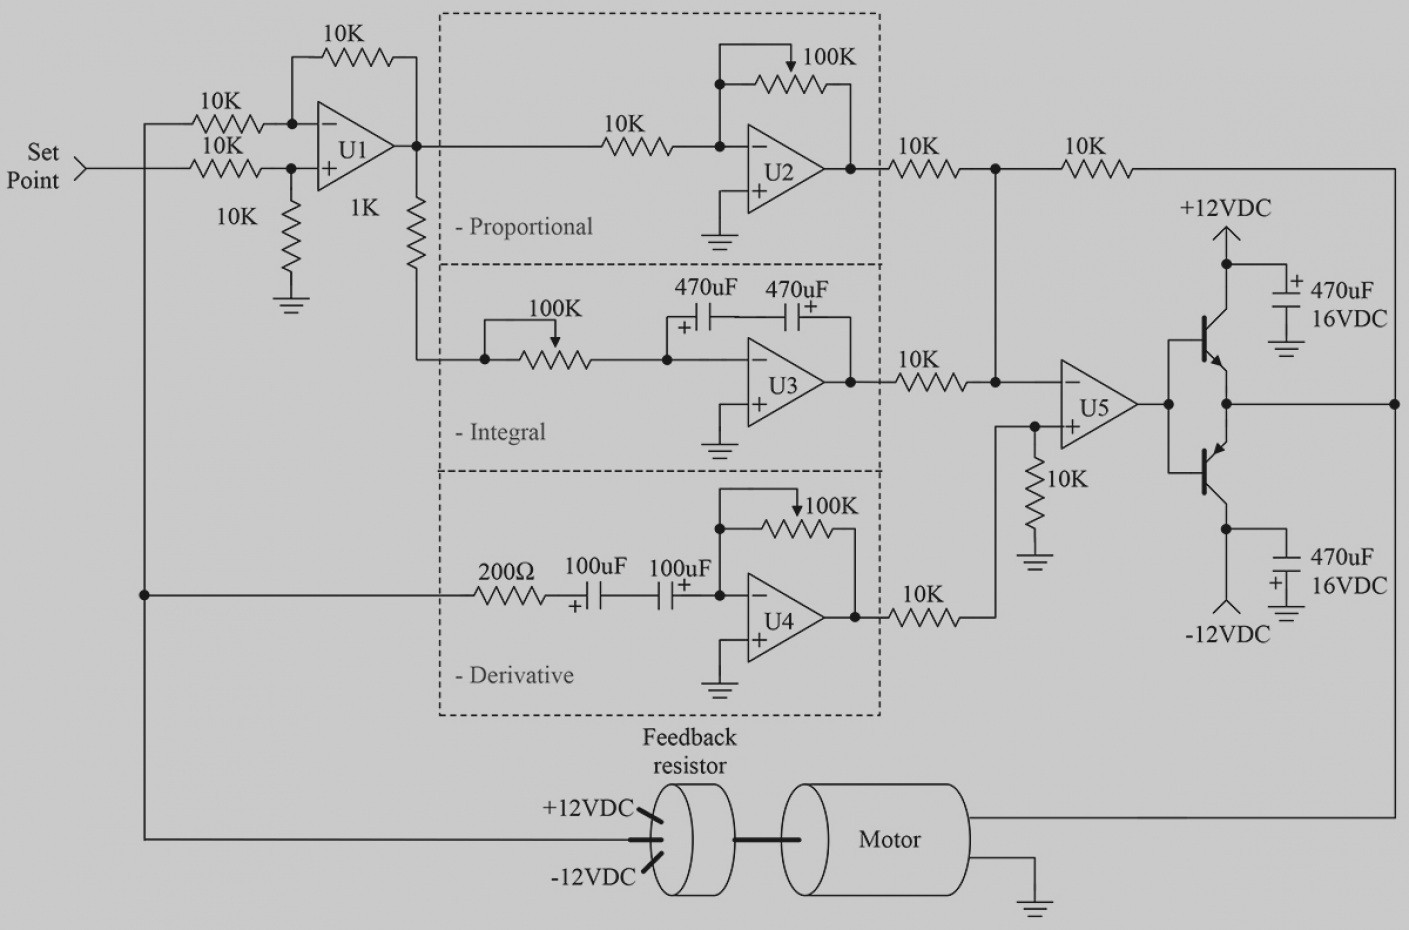 25 New Pid Controller Circuit Diagram The PID Part 1 Nuts Volts Magazine